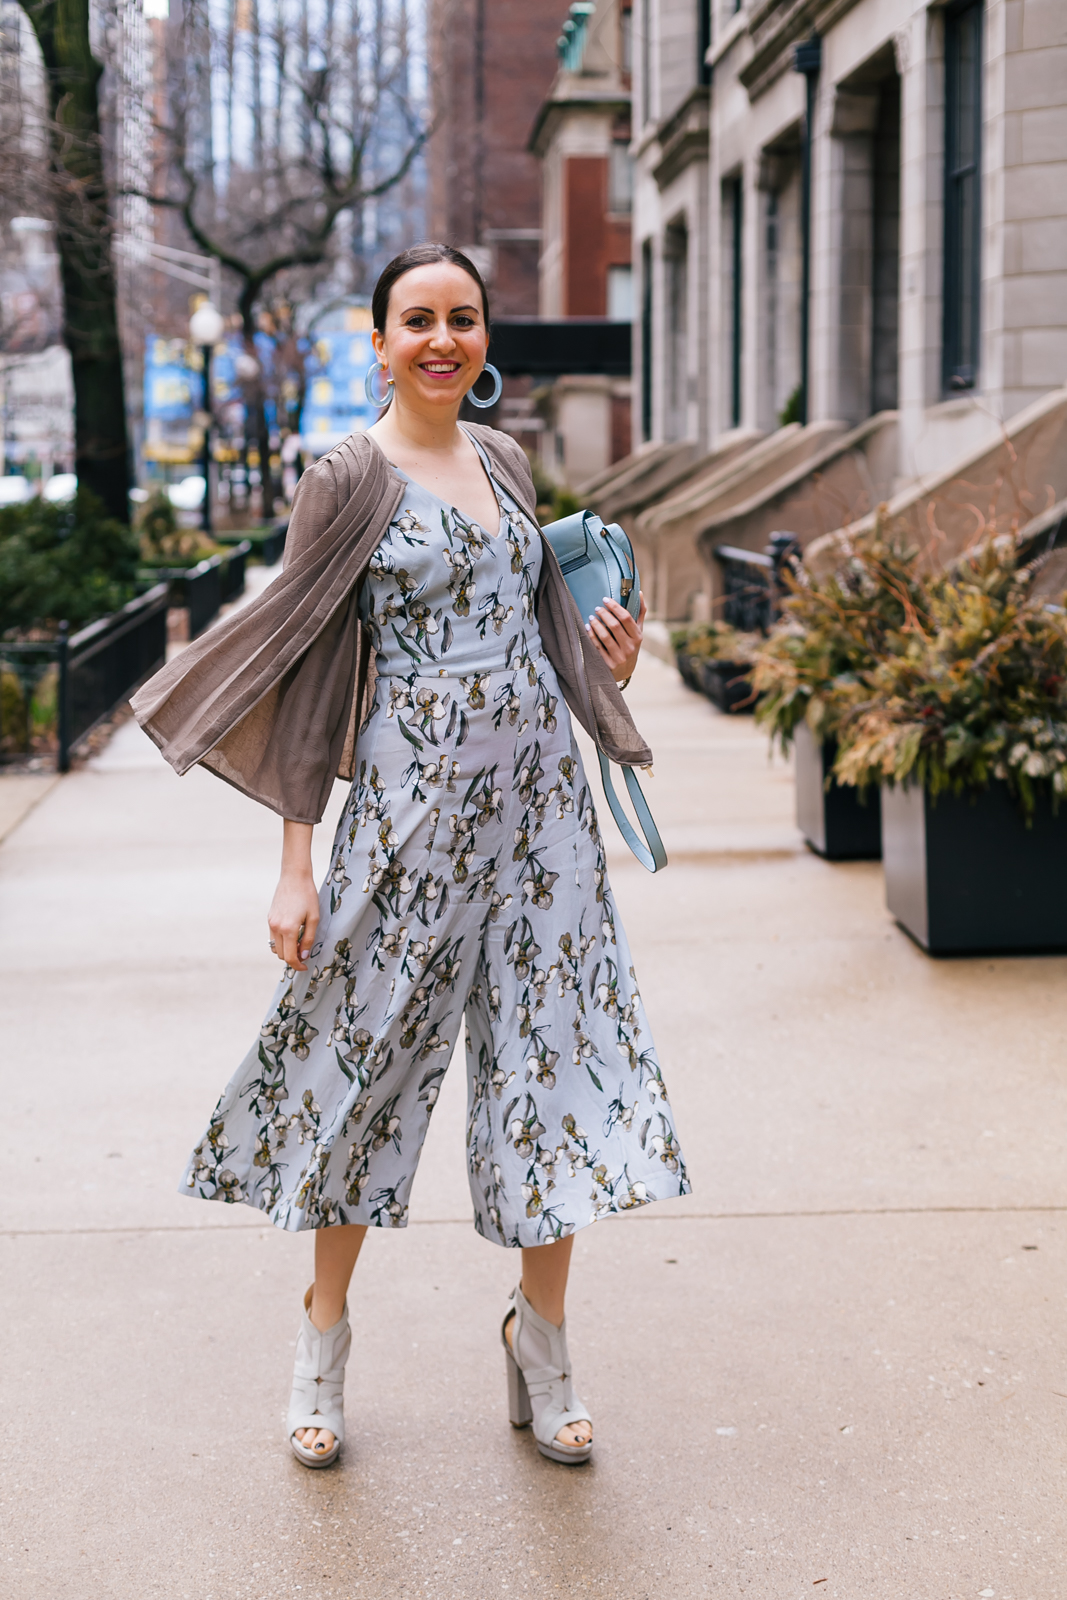 Yana Frigelis of NoMad Luxuries wearing a floral culotte jumpsuit in nuetral colors and accessories for Spring